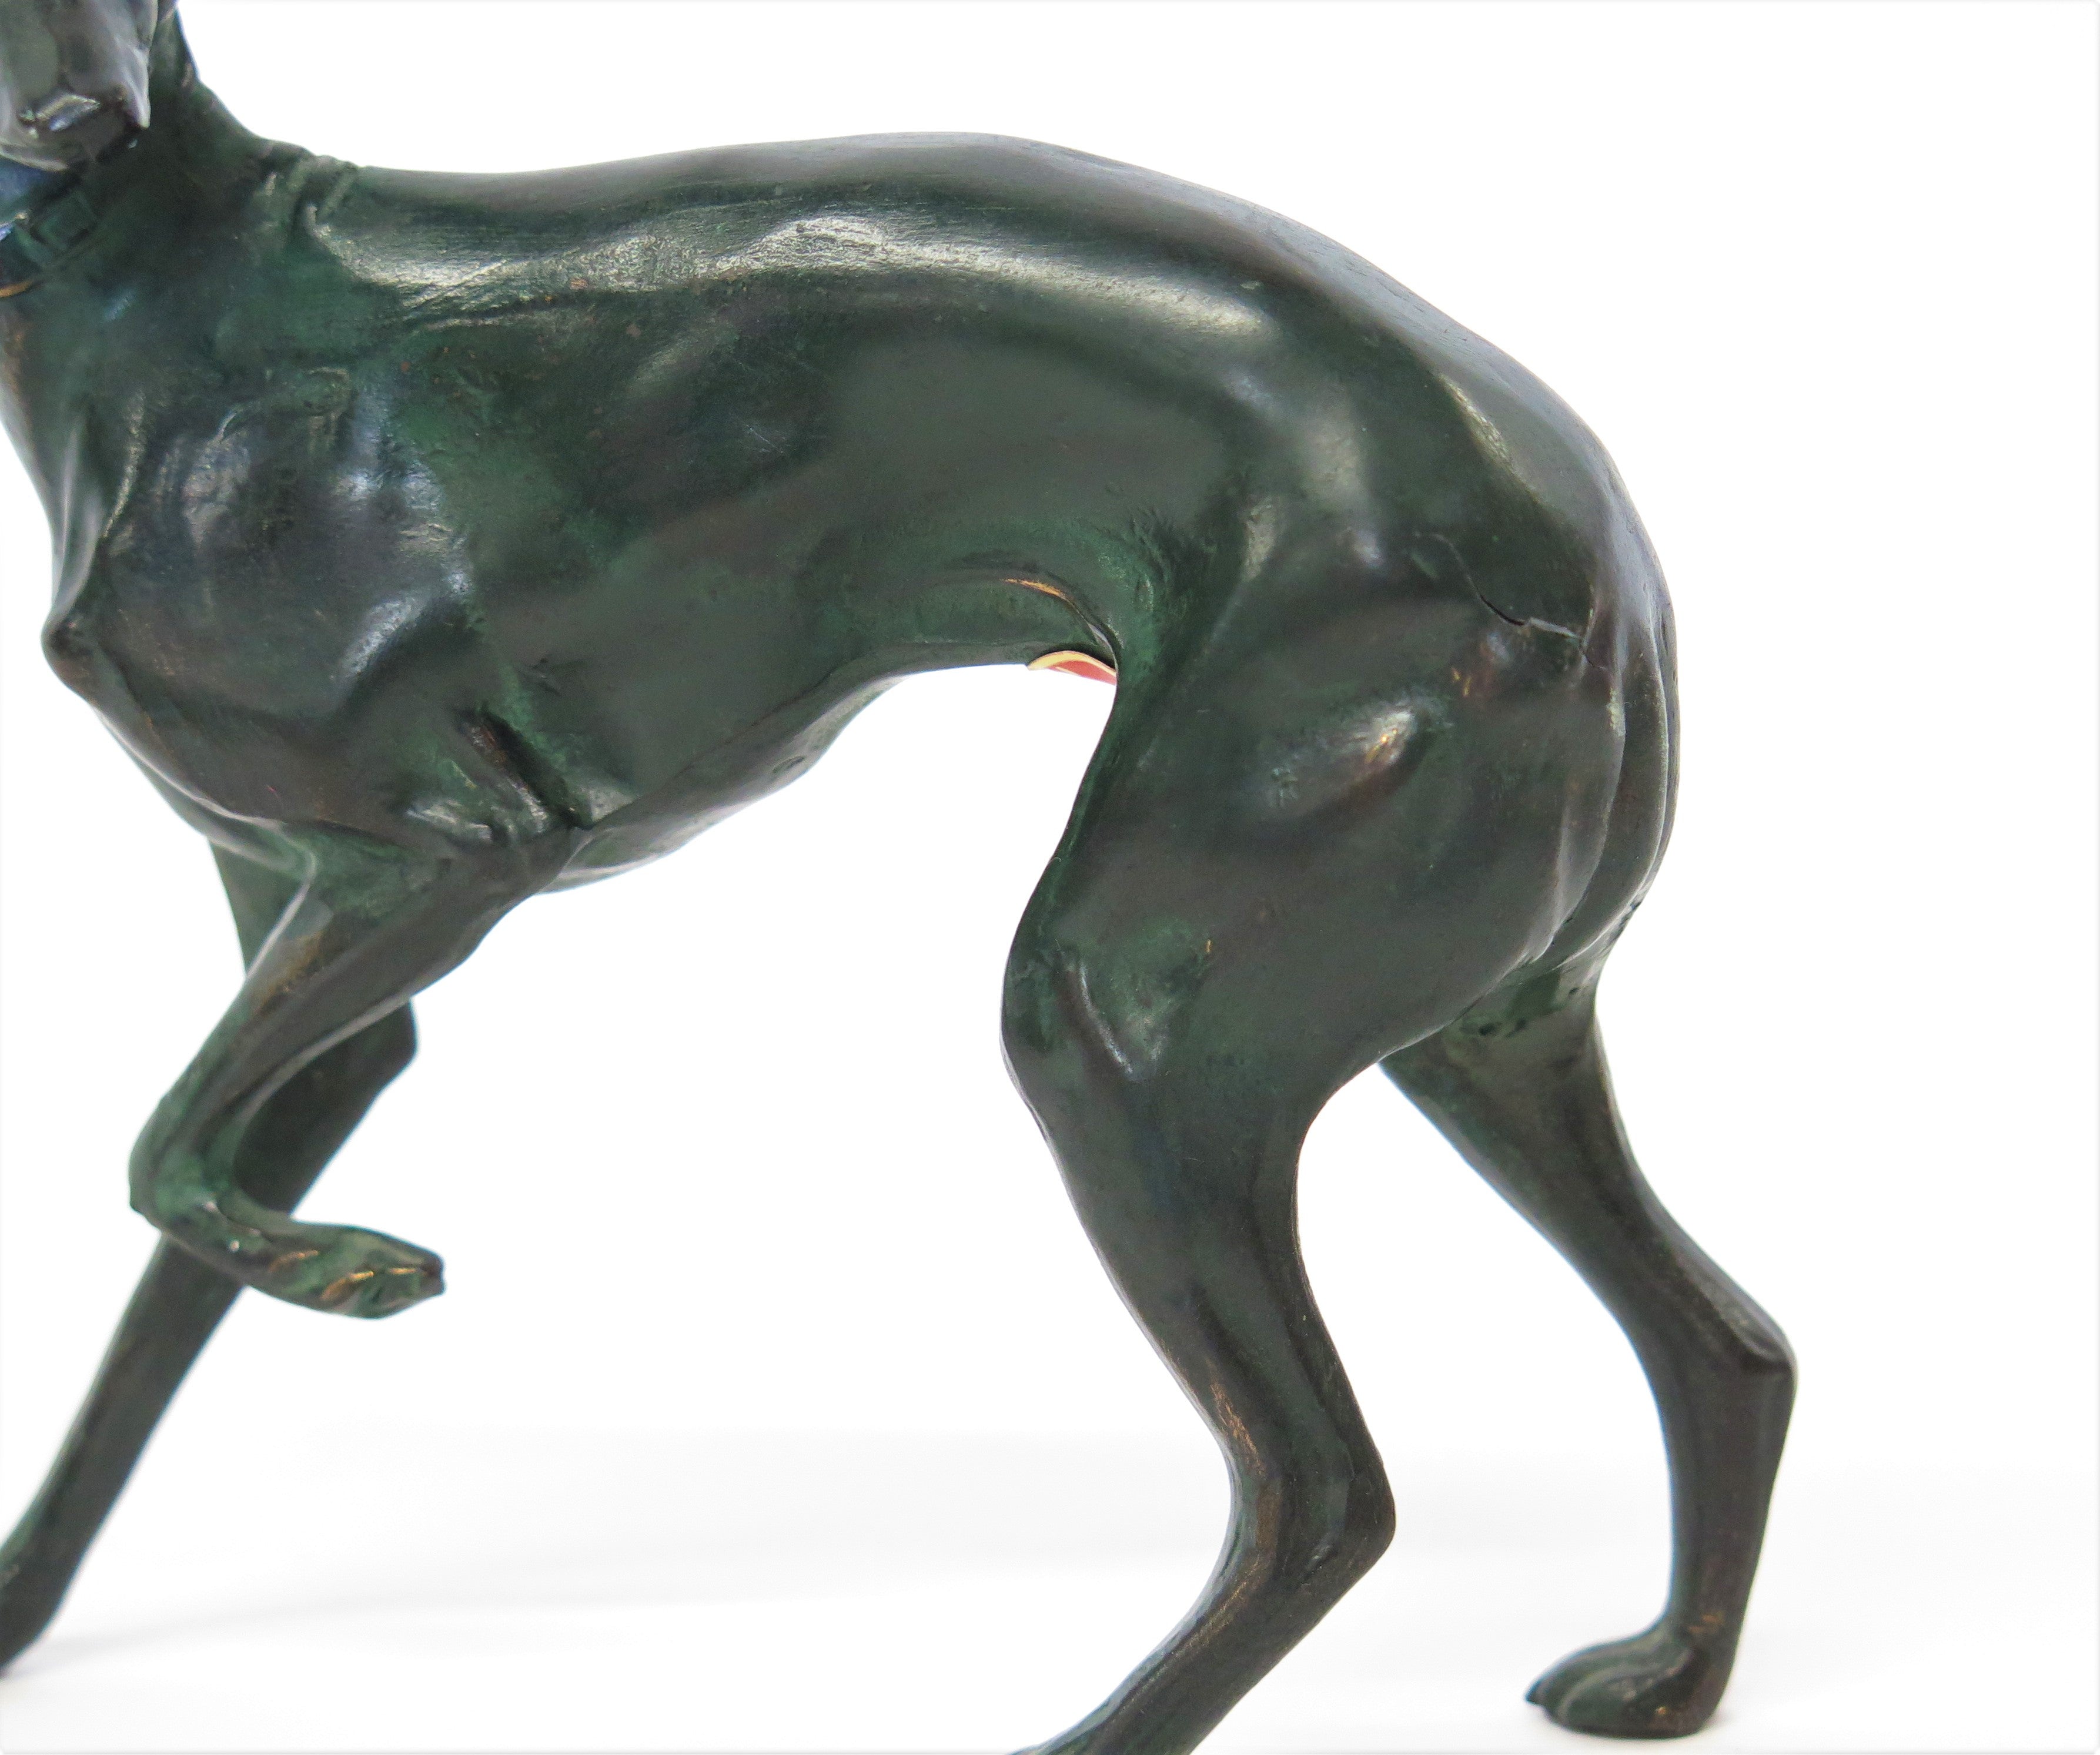 Italian Bronze Sculpture of a Whippet, Stamped